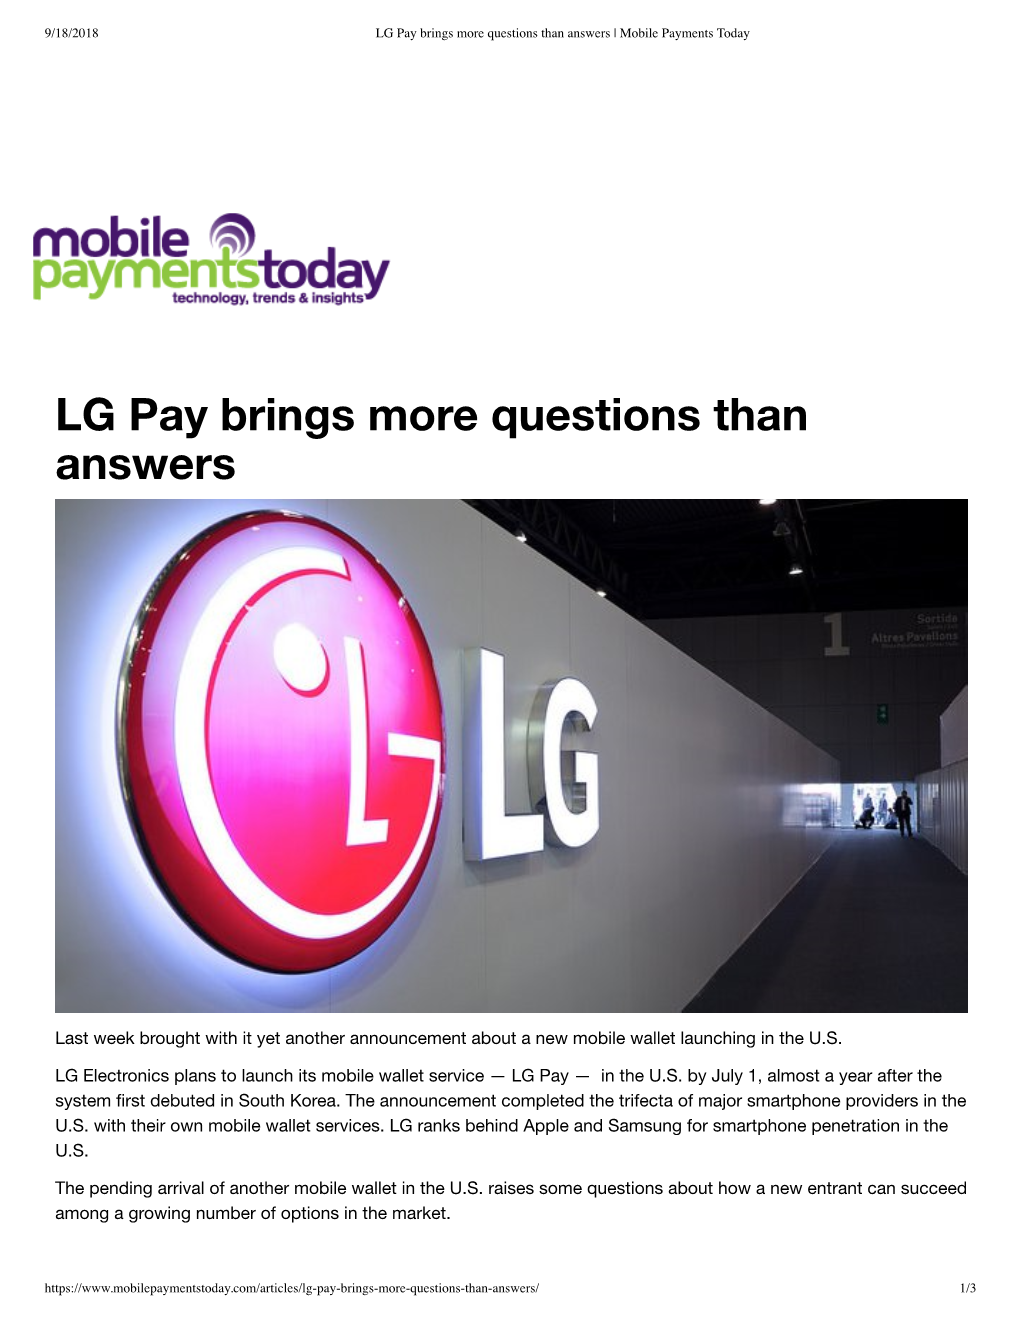 LG Pay Brings More Questions Than Answers Mobile